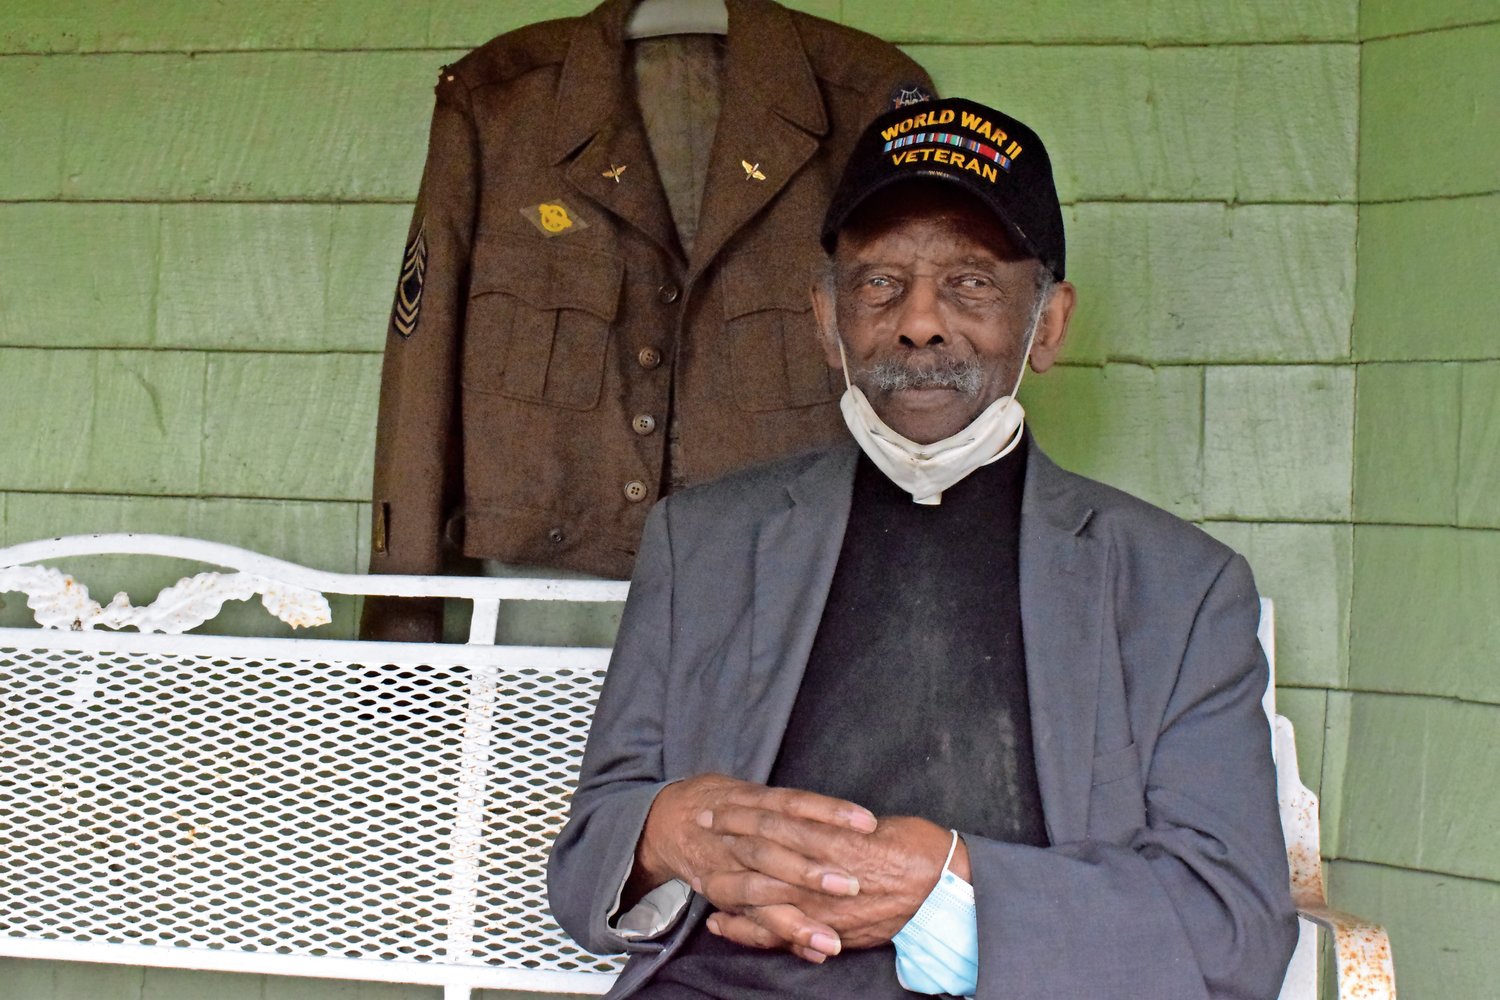 The Rev. Eugene Purvis, World War II veteran and local community leader, died on Feb. 5. at 97.